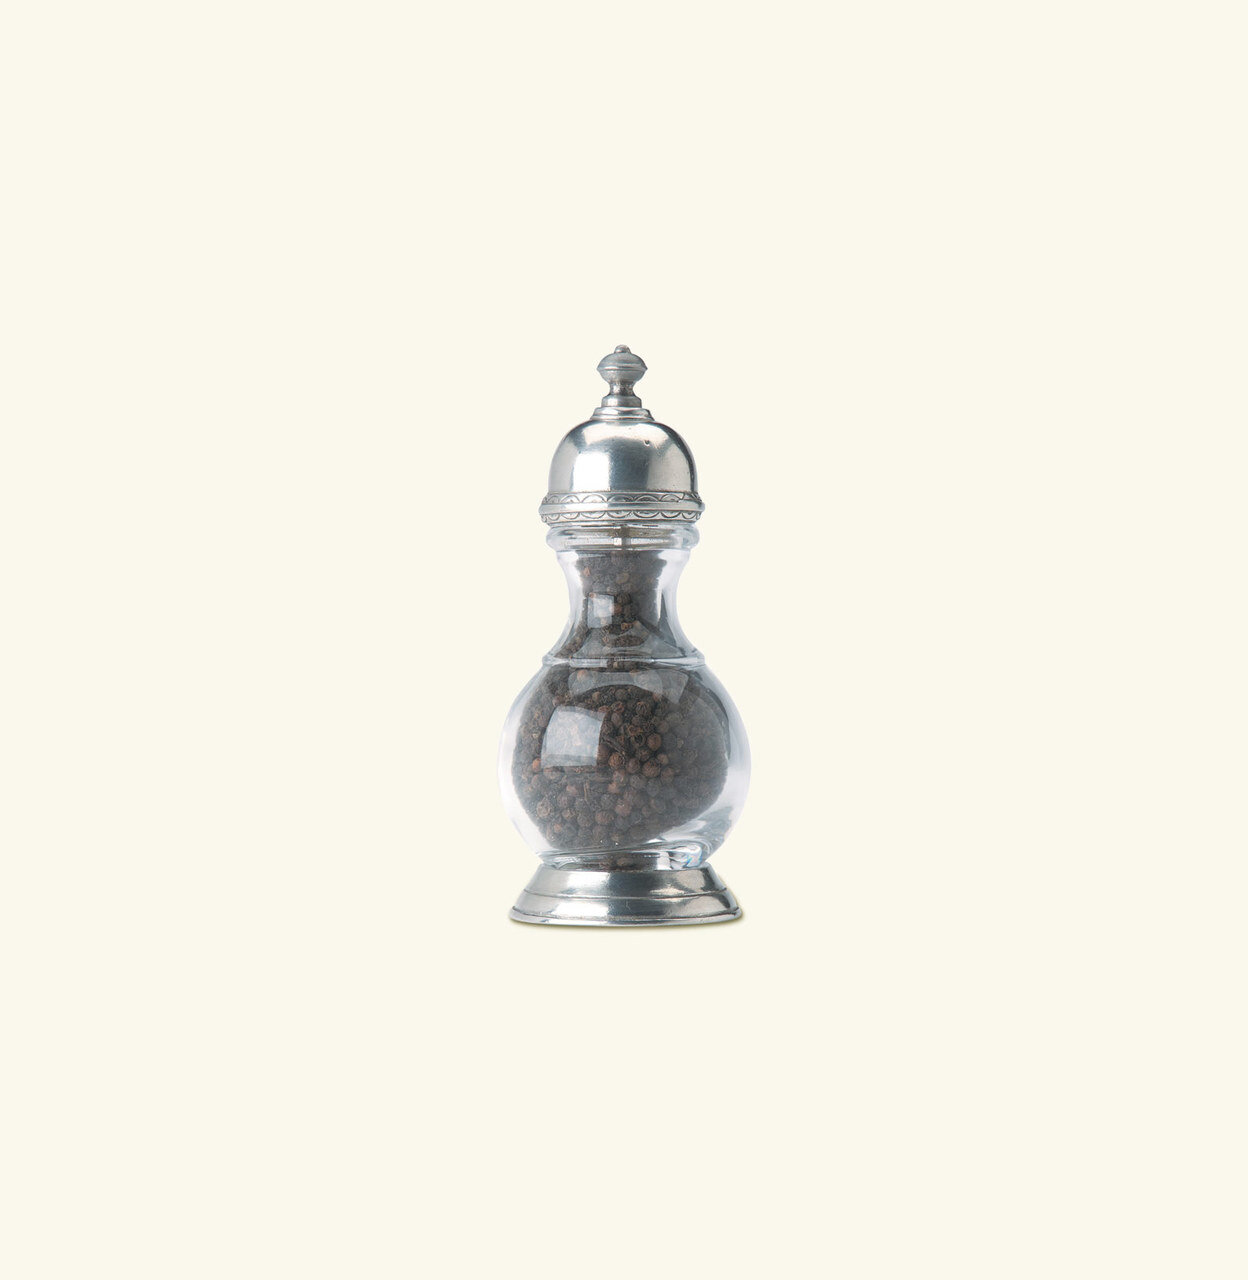 Match Pewter Lucca Pepper Mill 1020